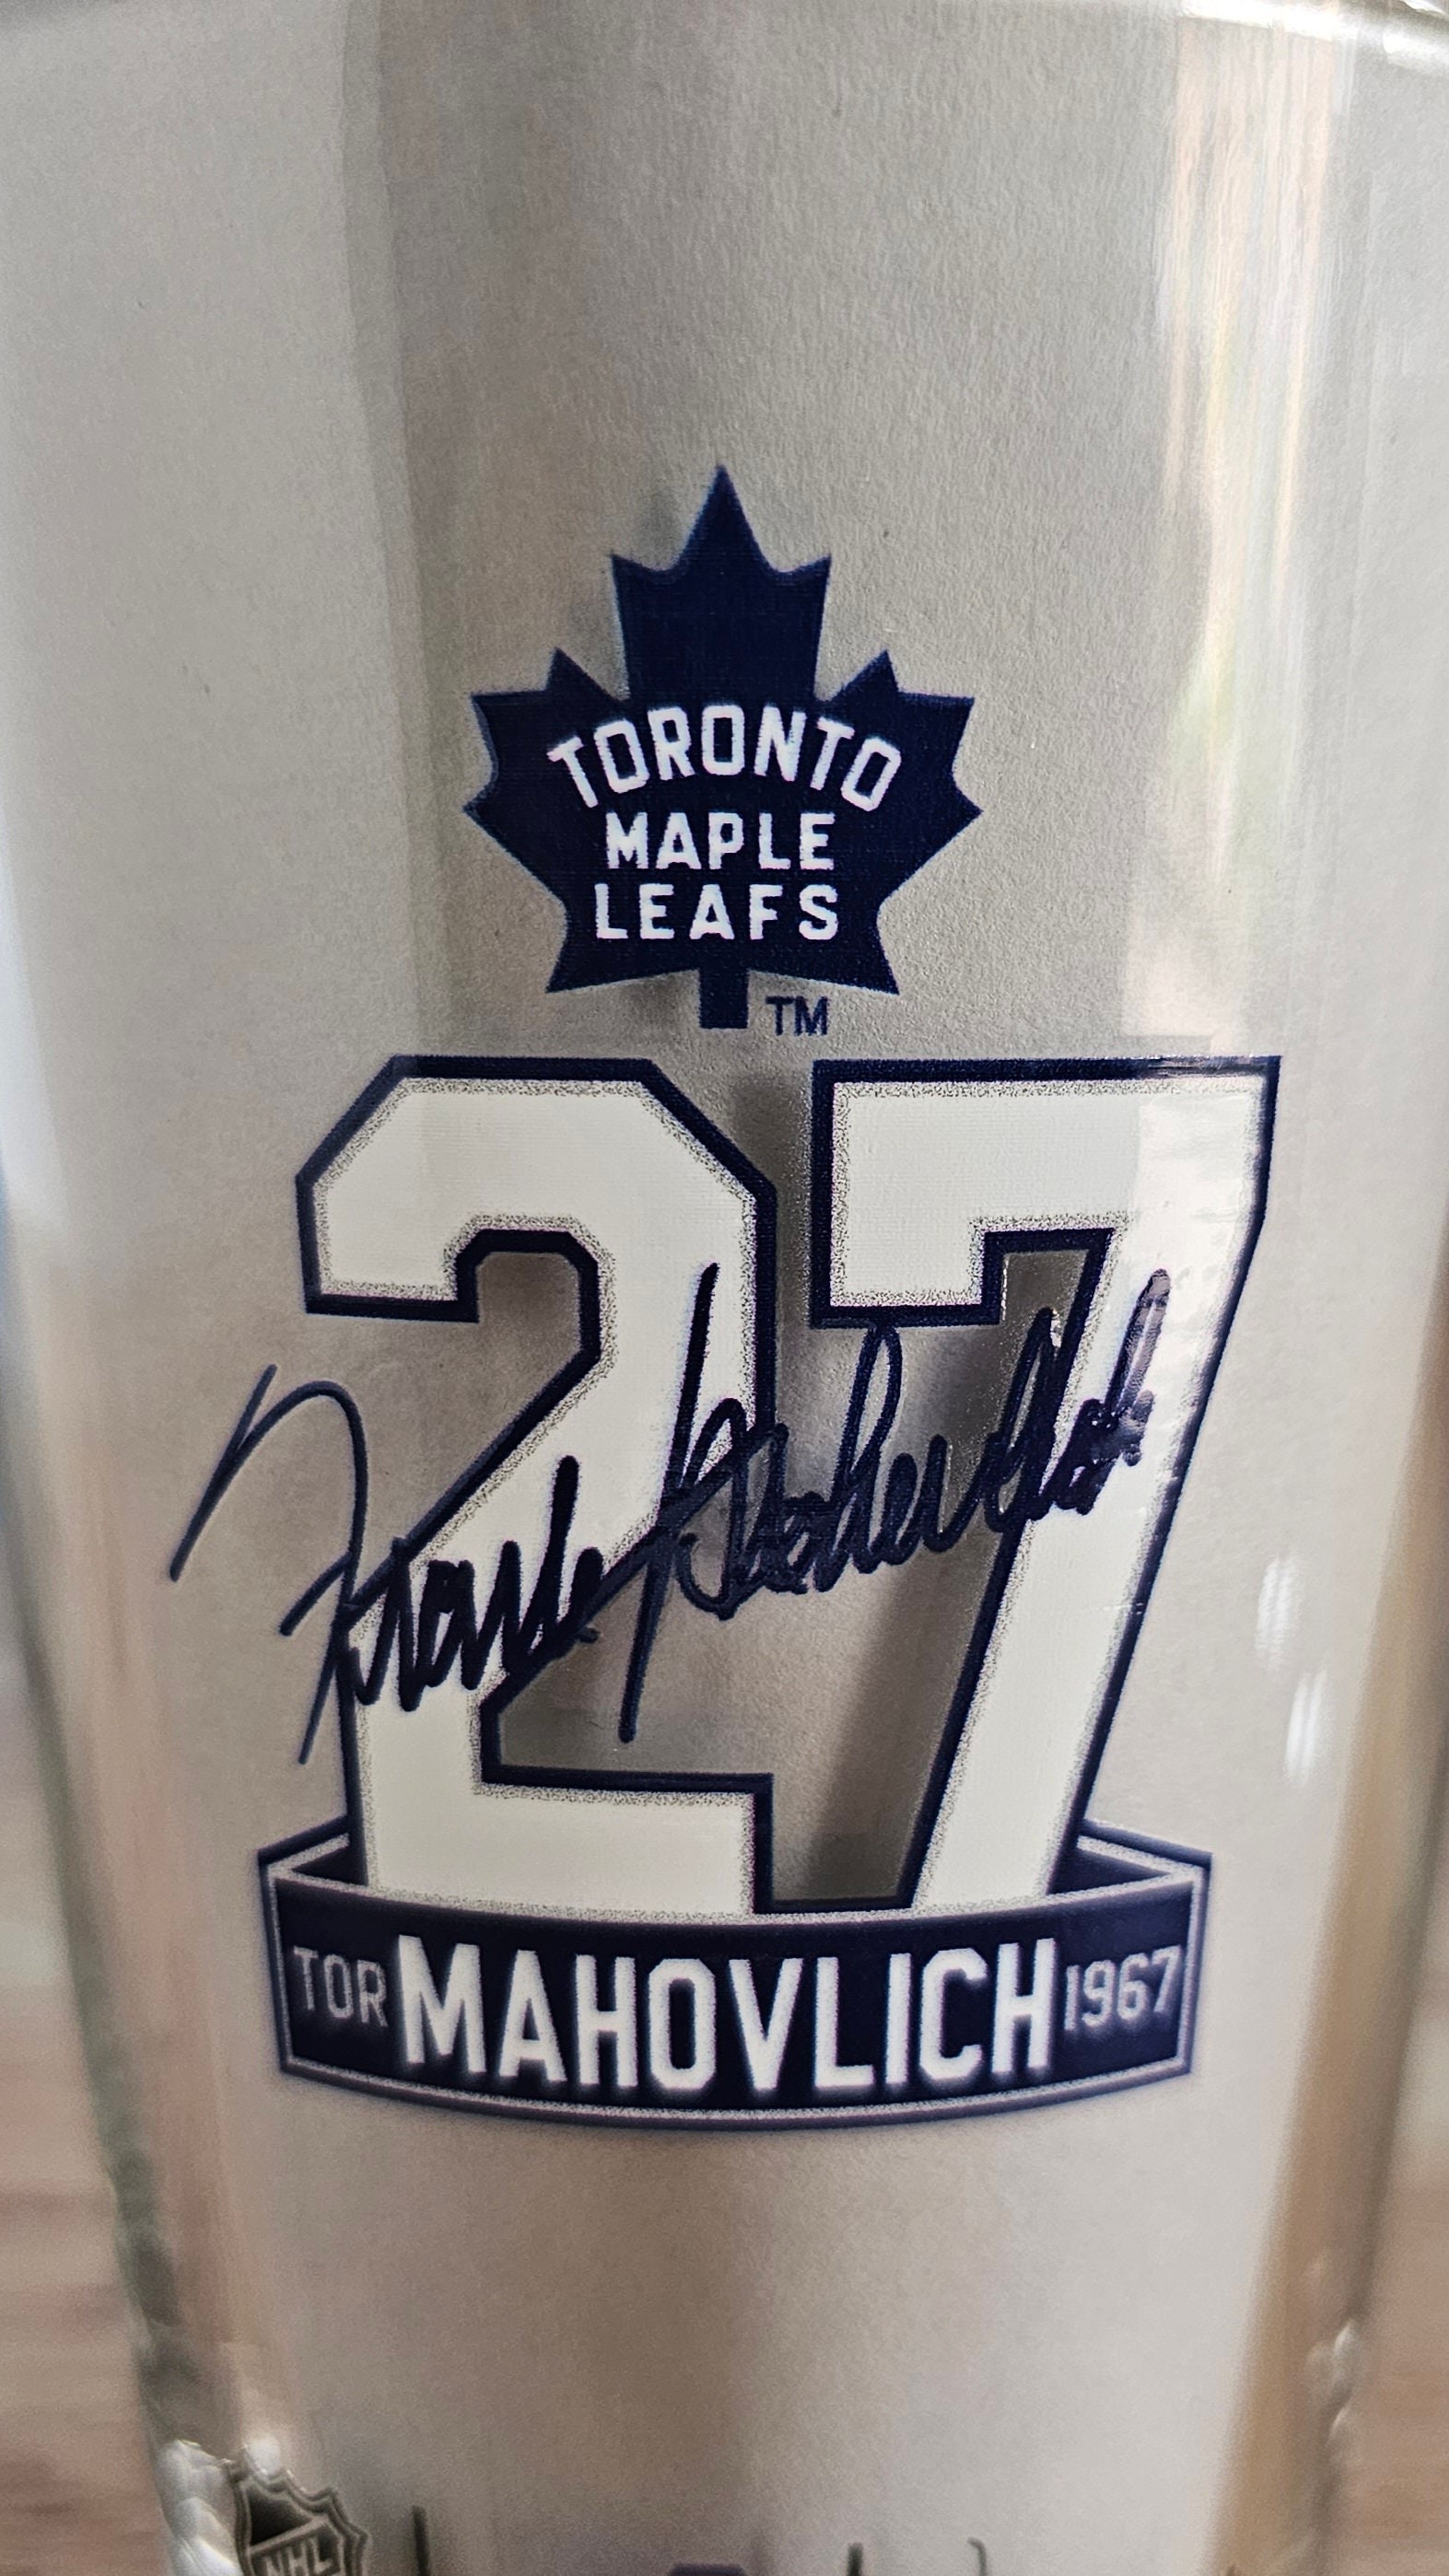 Molson Canadian's Stanley Cup® Batch was literally 'kissed by the Cup